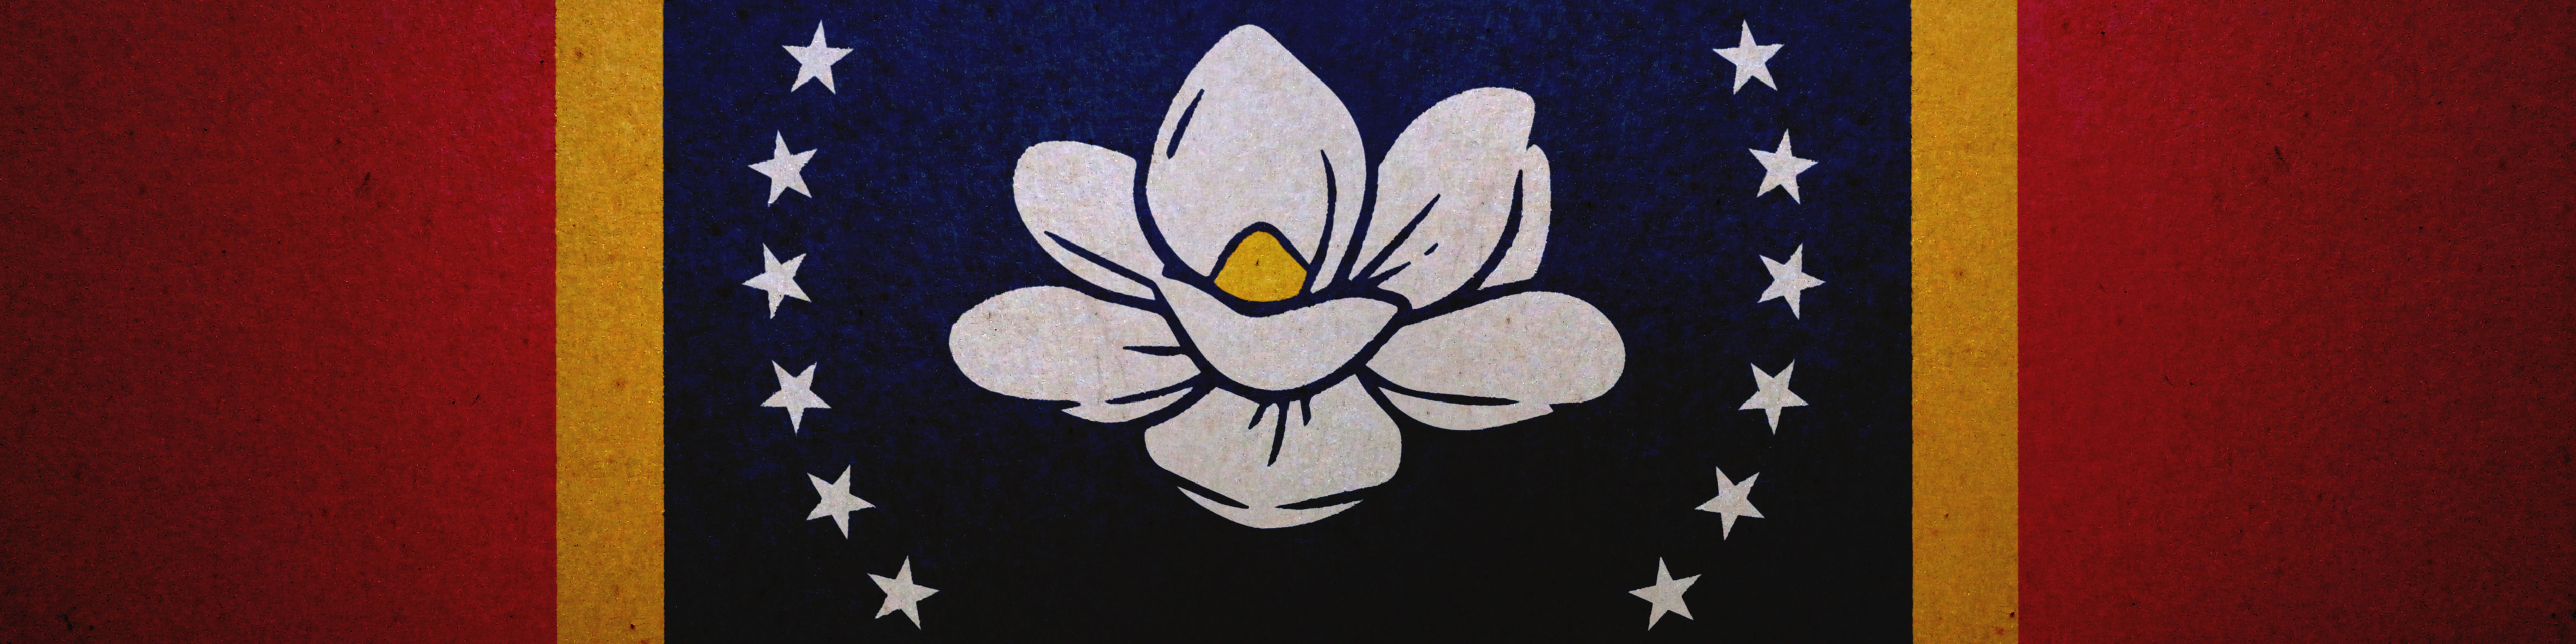 Detail of the new Mississippi state flag with a magnolia flower in the center and stars surrounding it